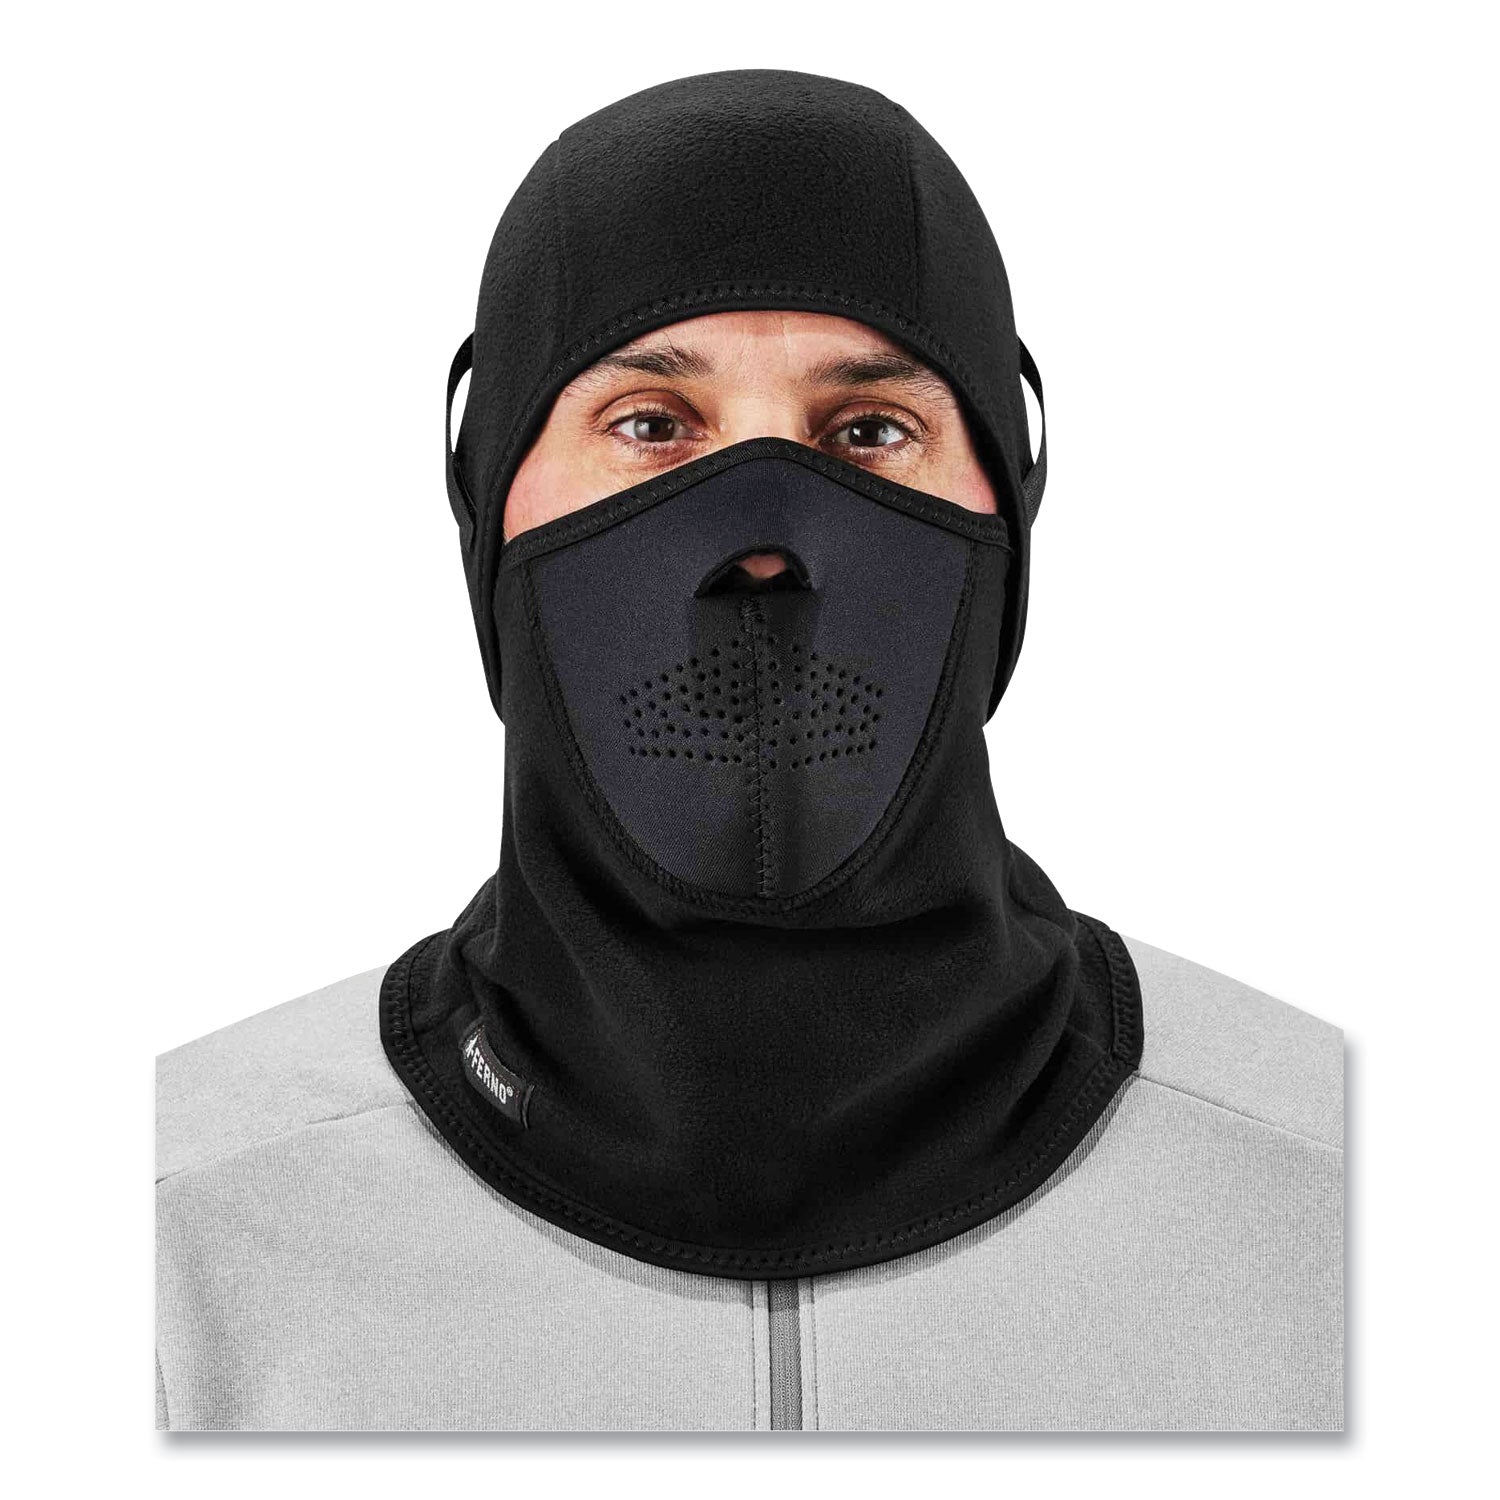 n-ferno-6827-2-piece-fleece-neoprene-balaclava-face-mask-one-size-fits-most-black-ships-in-1-3-business-days_ego16827 - 4